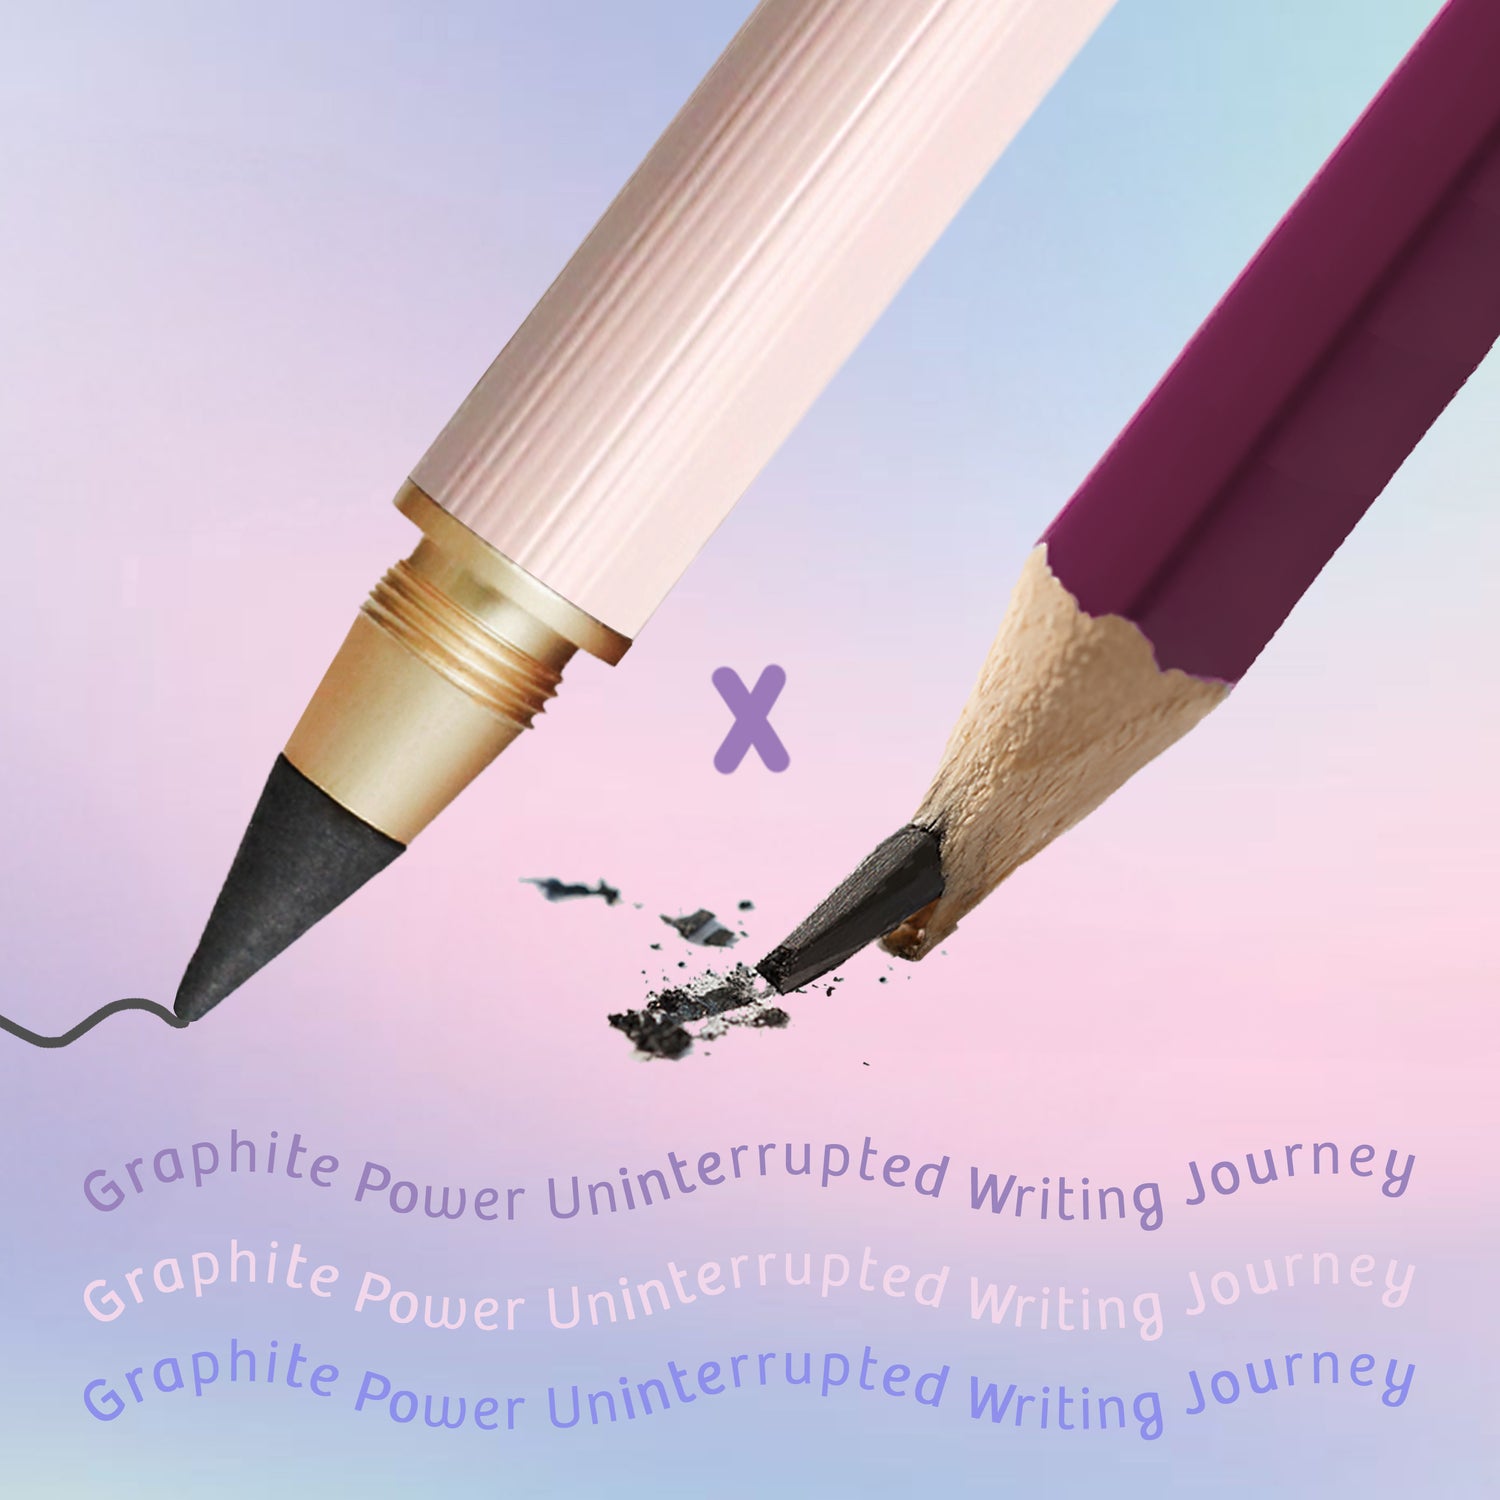 Graphite power uninterrupted writing journey. The difference between our pencil and standard pencils